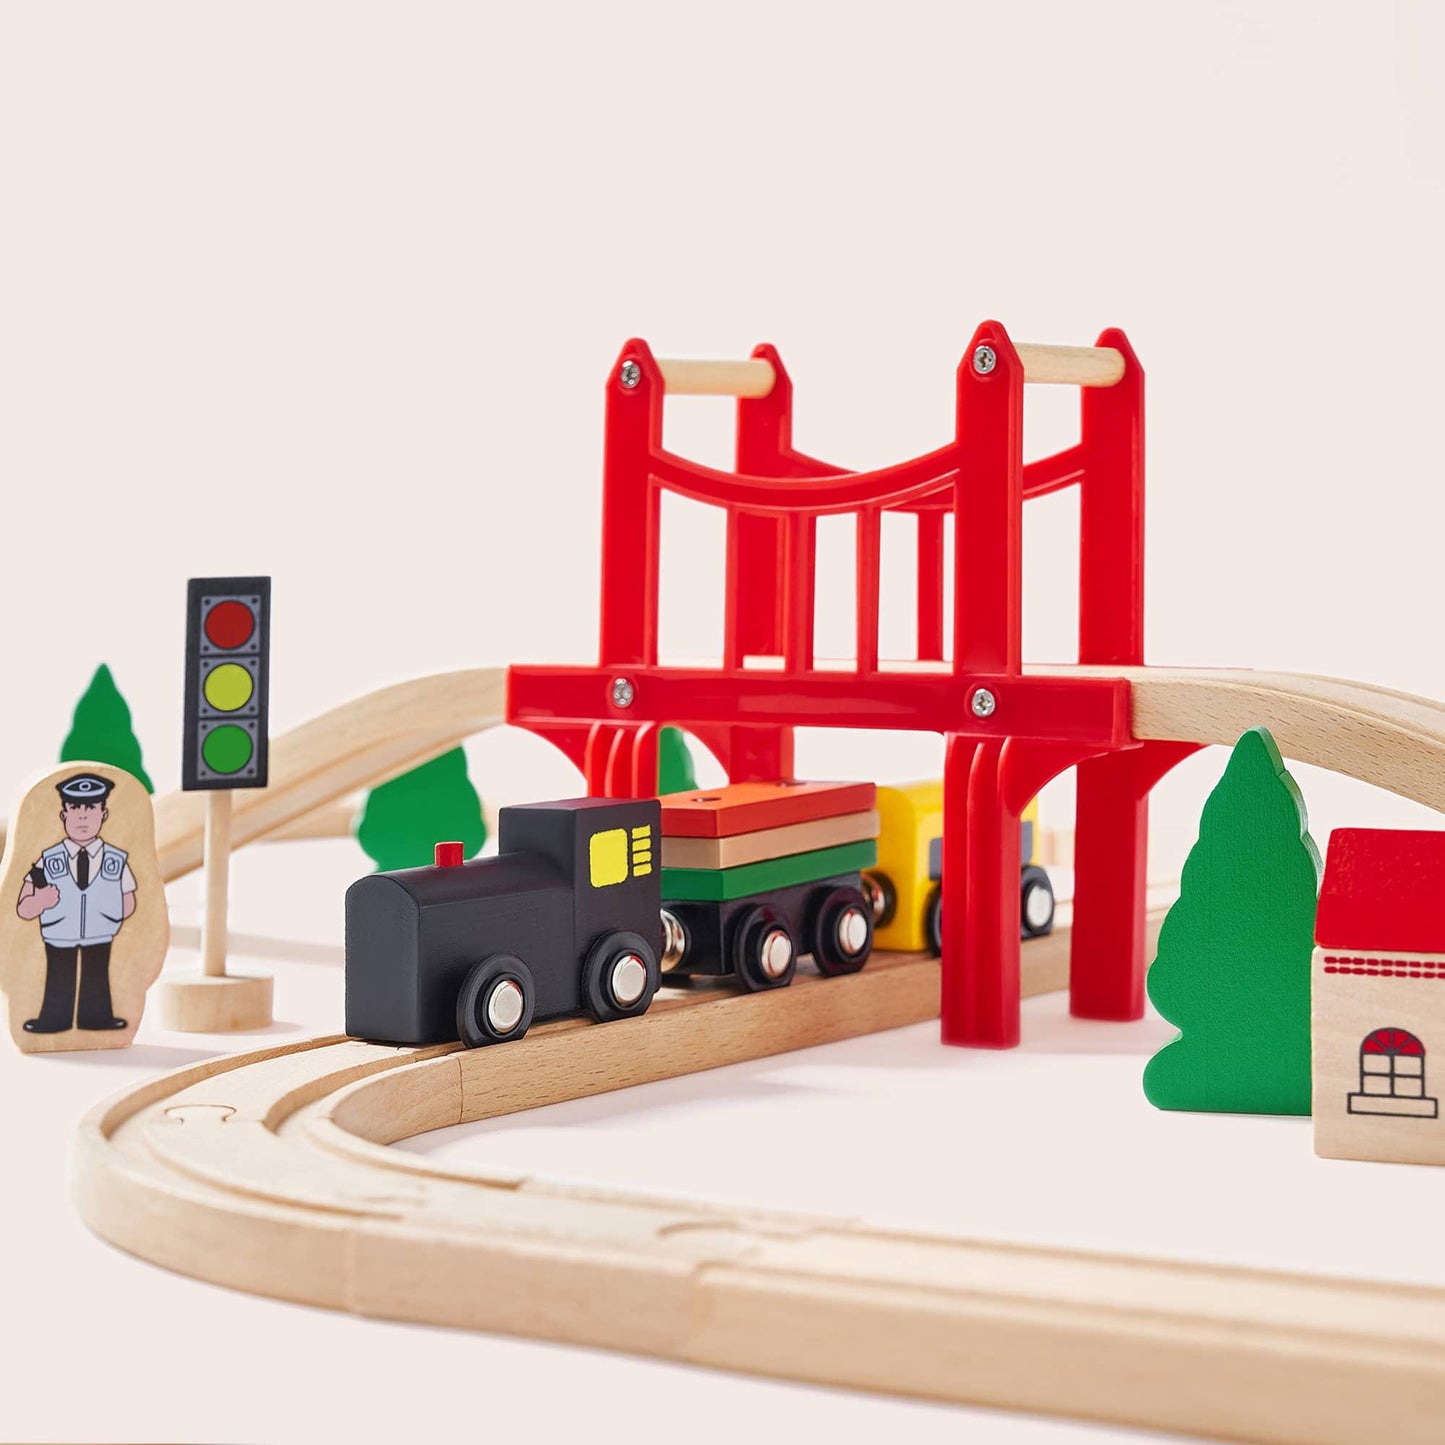 Tiny Land® Wooden Train Set for Children 39 Pcs Used